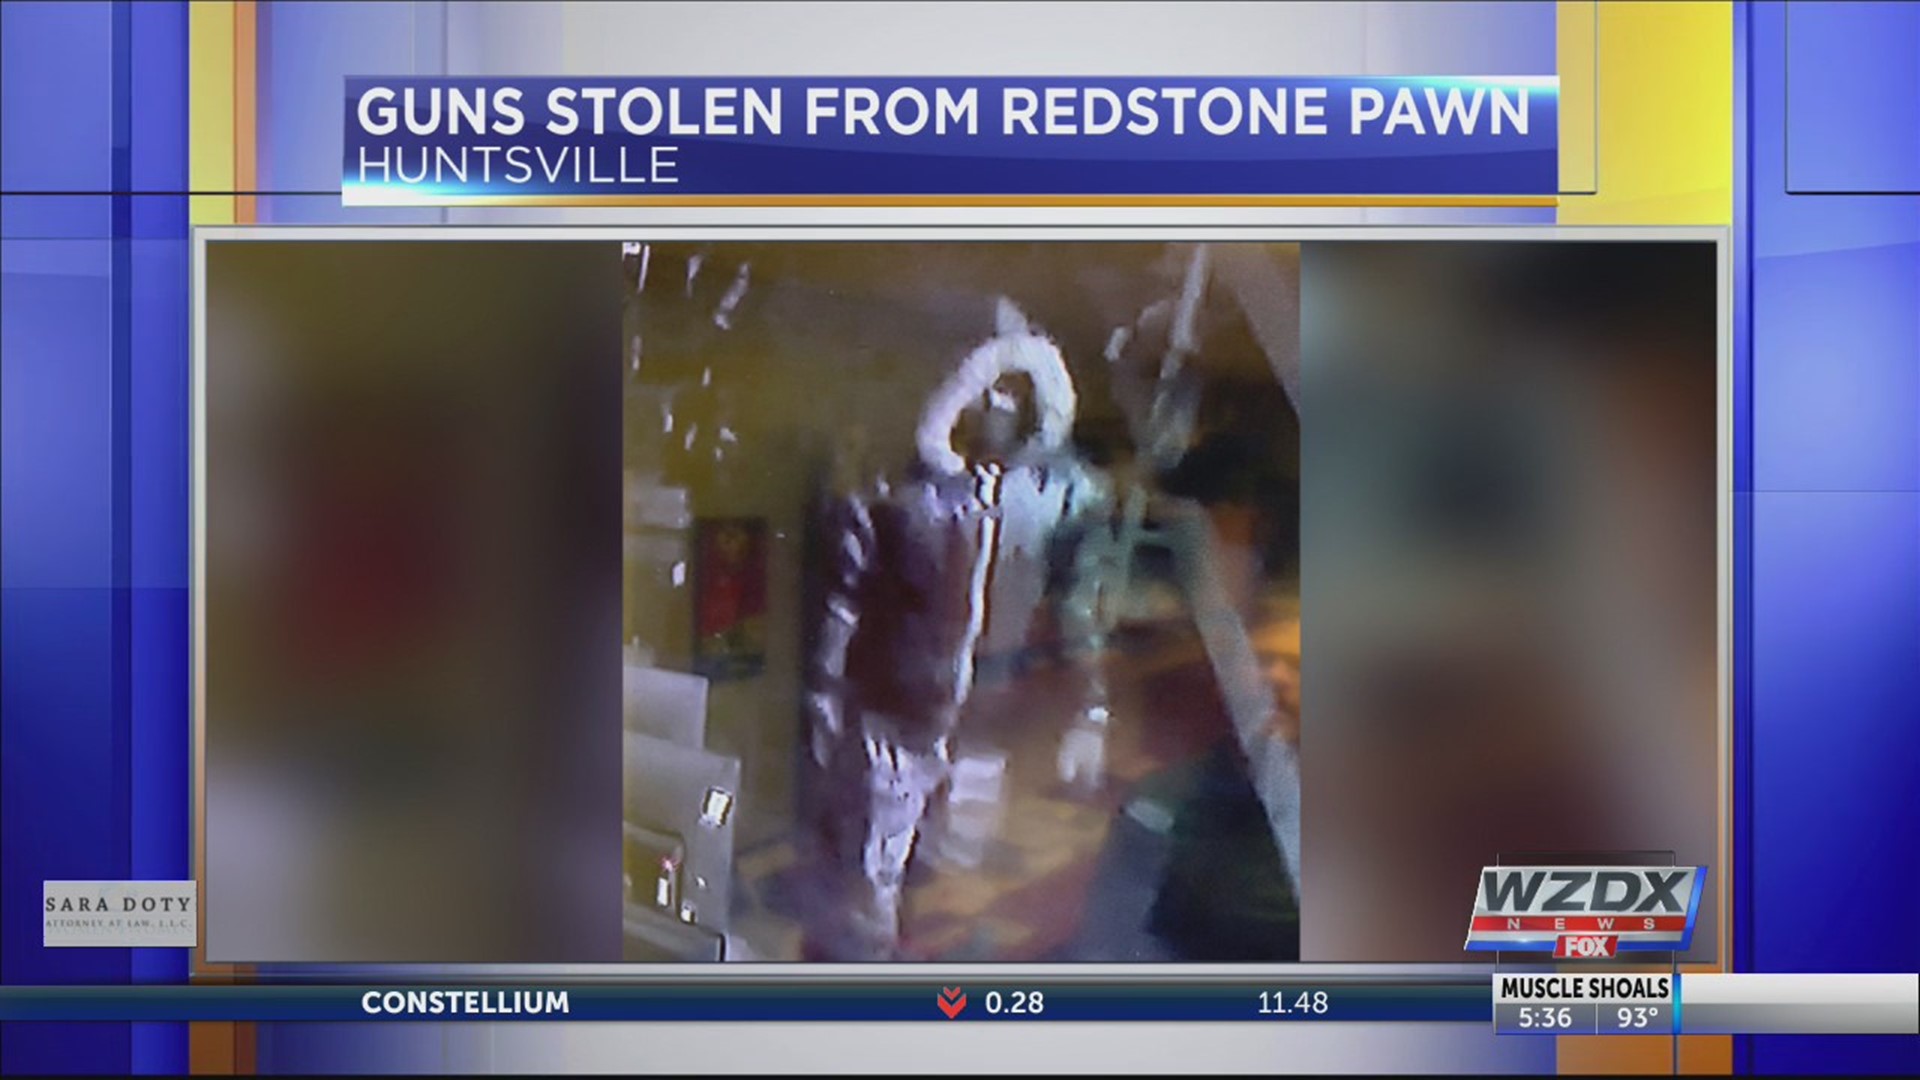 Police are searching for a gun theft suspect who stole from a pawn shop.